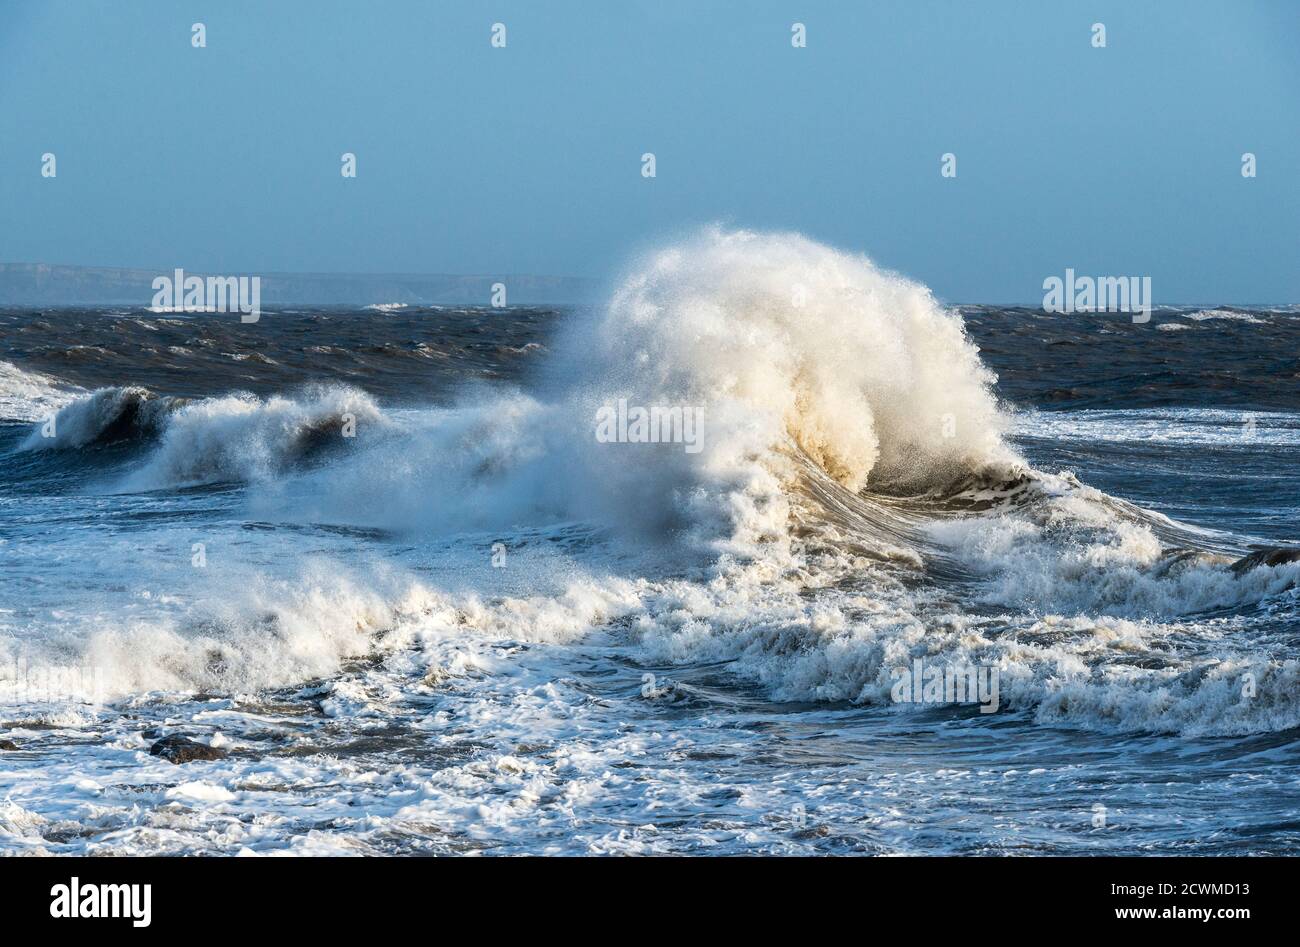 A breaking wave on a rough and stormy day, seen from the breakwater at Porthcawl, south Wales, UK Stock Photo